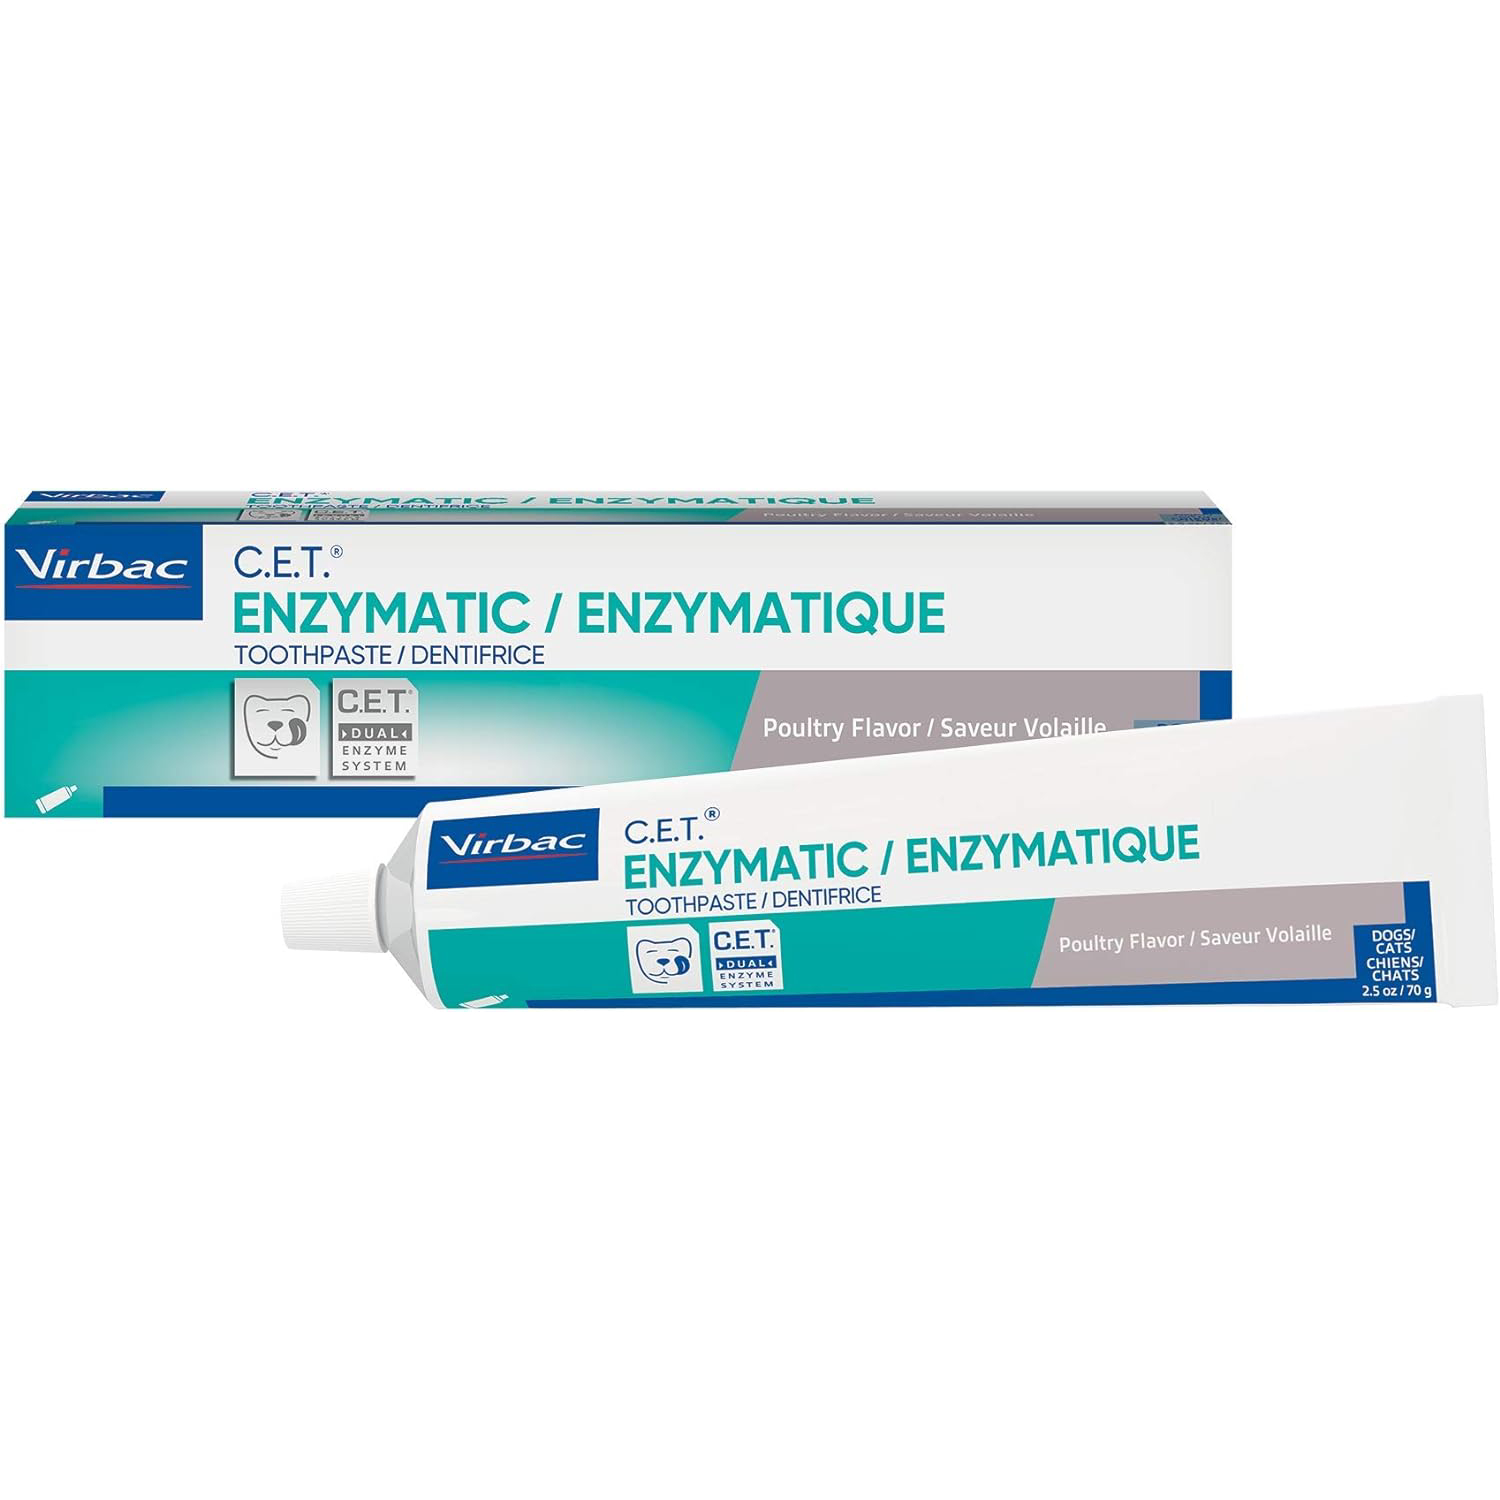 Virbac CET Enzymatic Toothpaste_ Eliminates Bad Breath by Removing Plaque & Tartar Buildup _ Best Pet Dental Care Toothpaste _ Poultry Flavor, 2.5 oz tube new